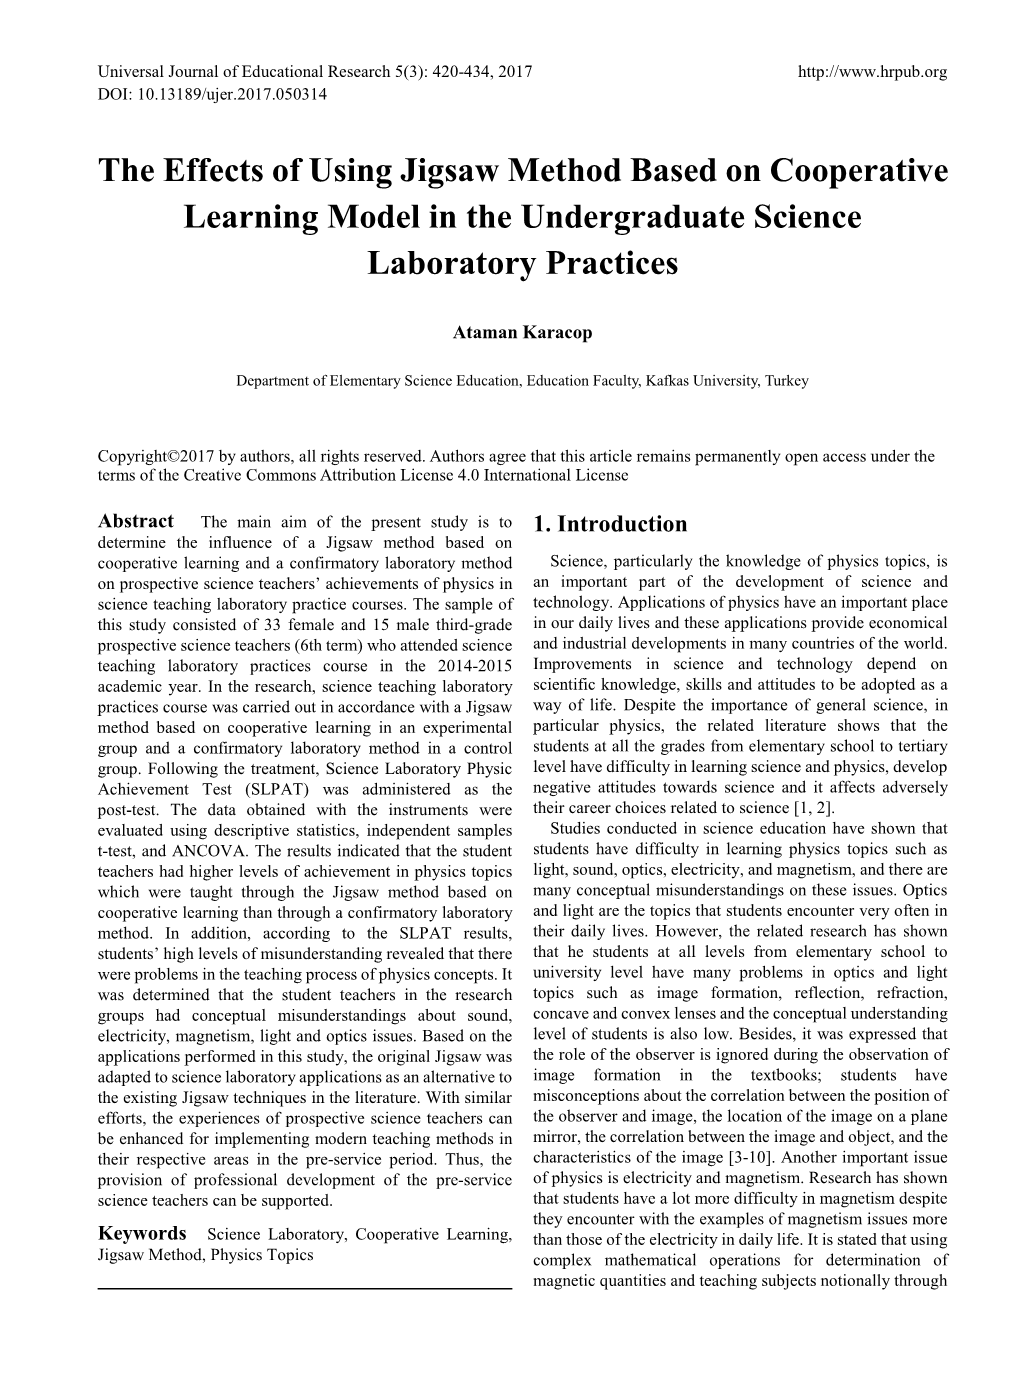 The Effects of Using Jigsaw Method Based on Cooperative Learning Model in the Undergraduate Science Laboratory Practices